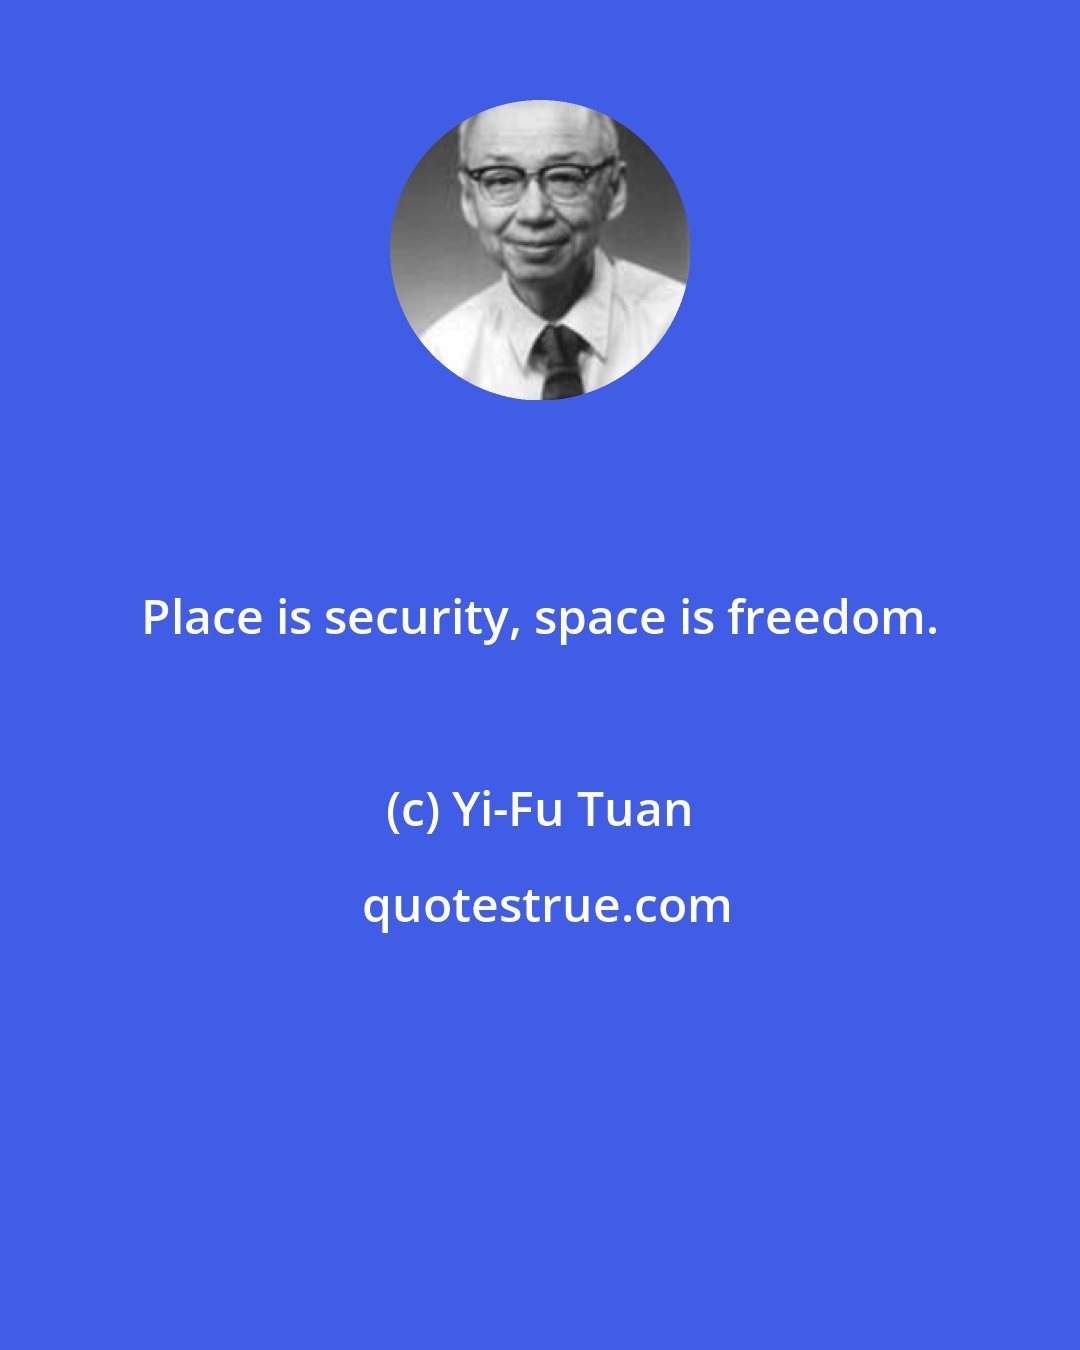 Yi-Fu Tuan: Place is security, space is freedom.